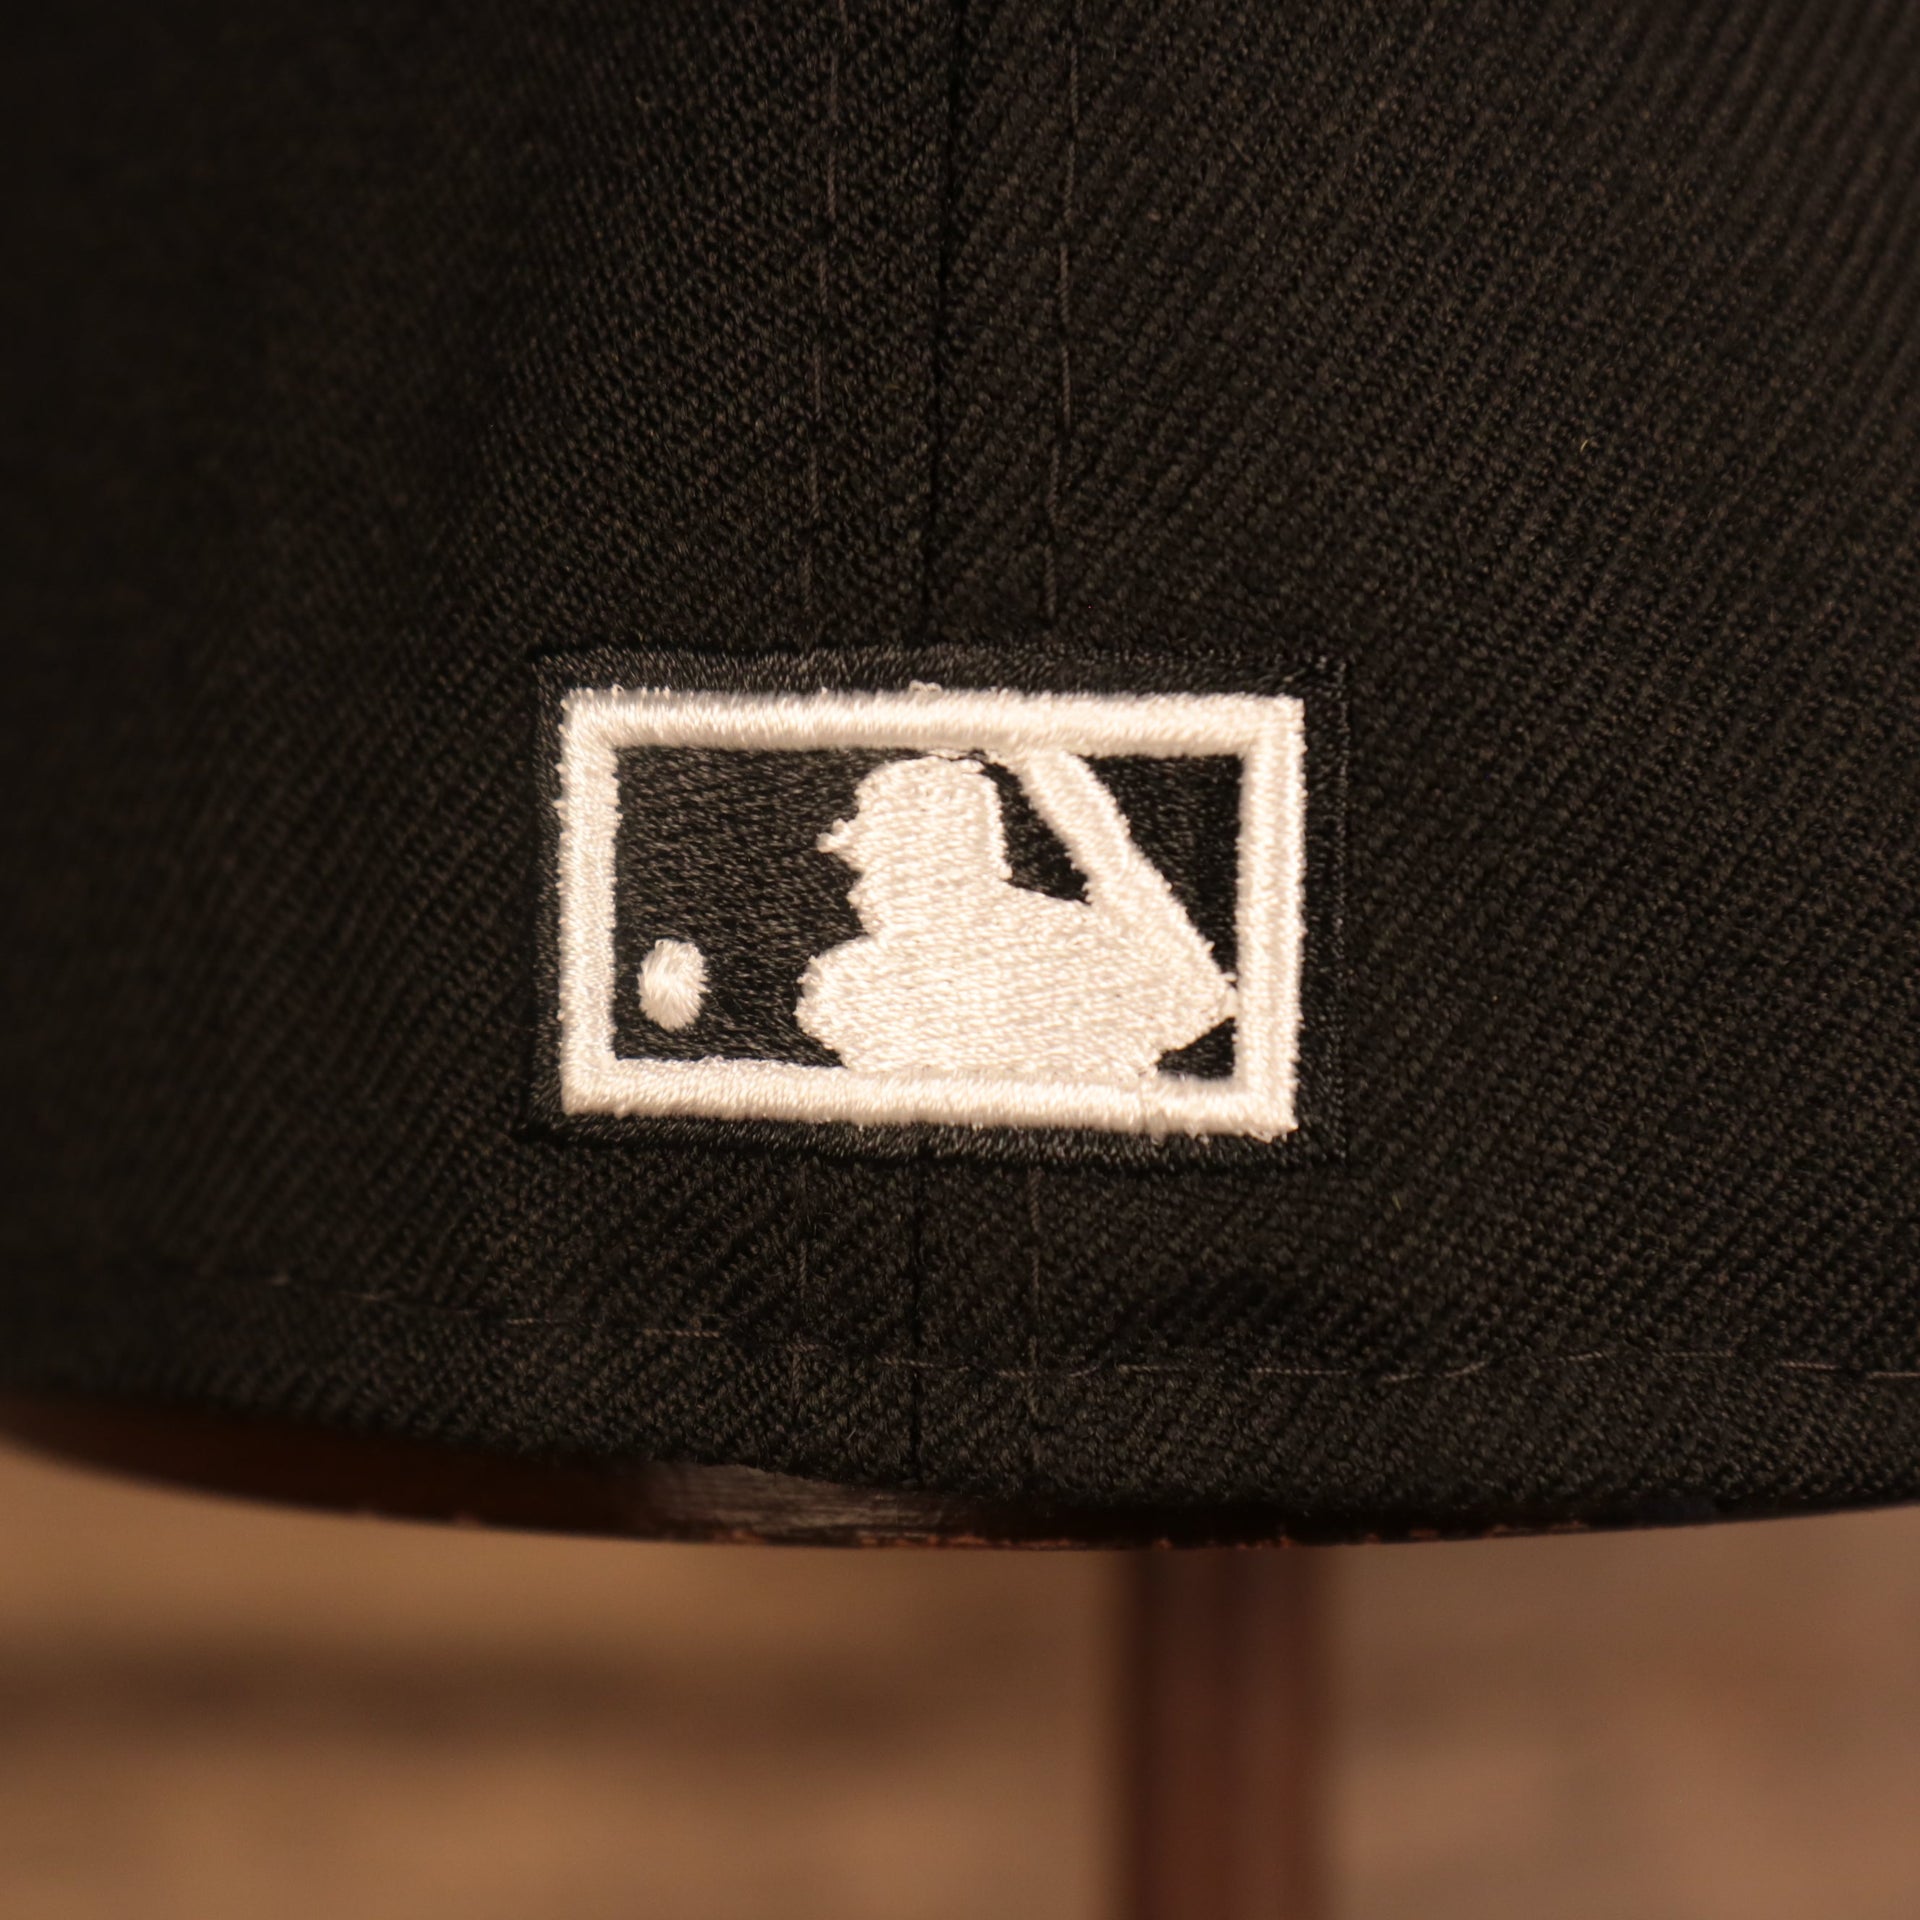 Close up of the MLB Batterman logo on the Florida Marlins Retro Cooperstown Iced Out Side Patch Orange Florida Gray Bottom 59Fifty Fitted Cap